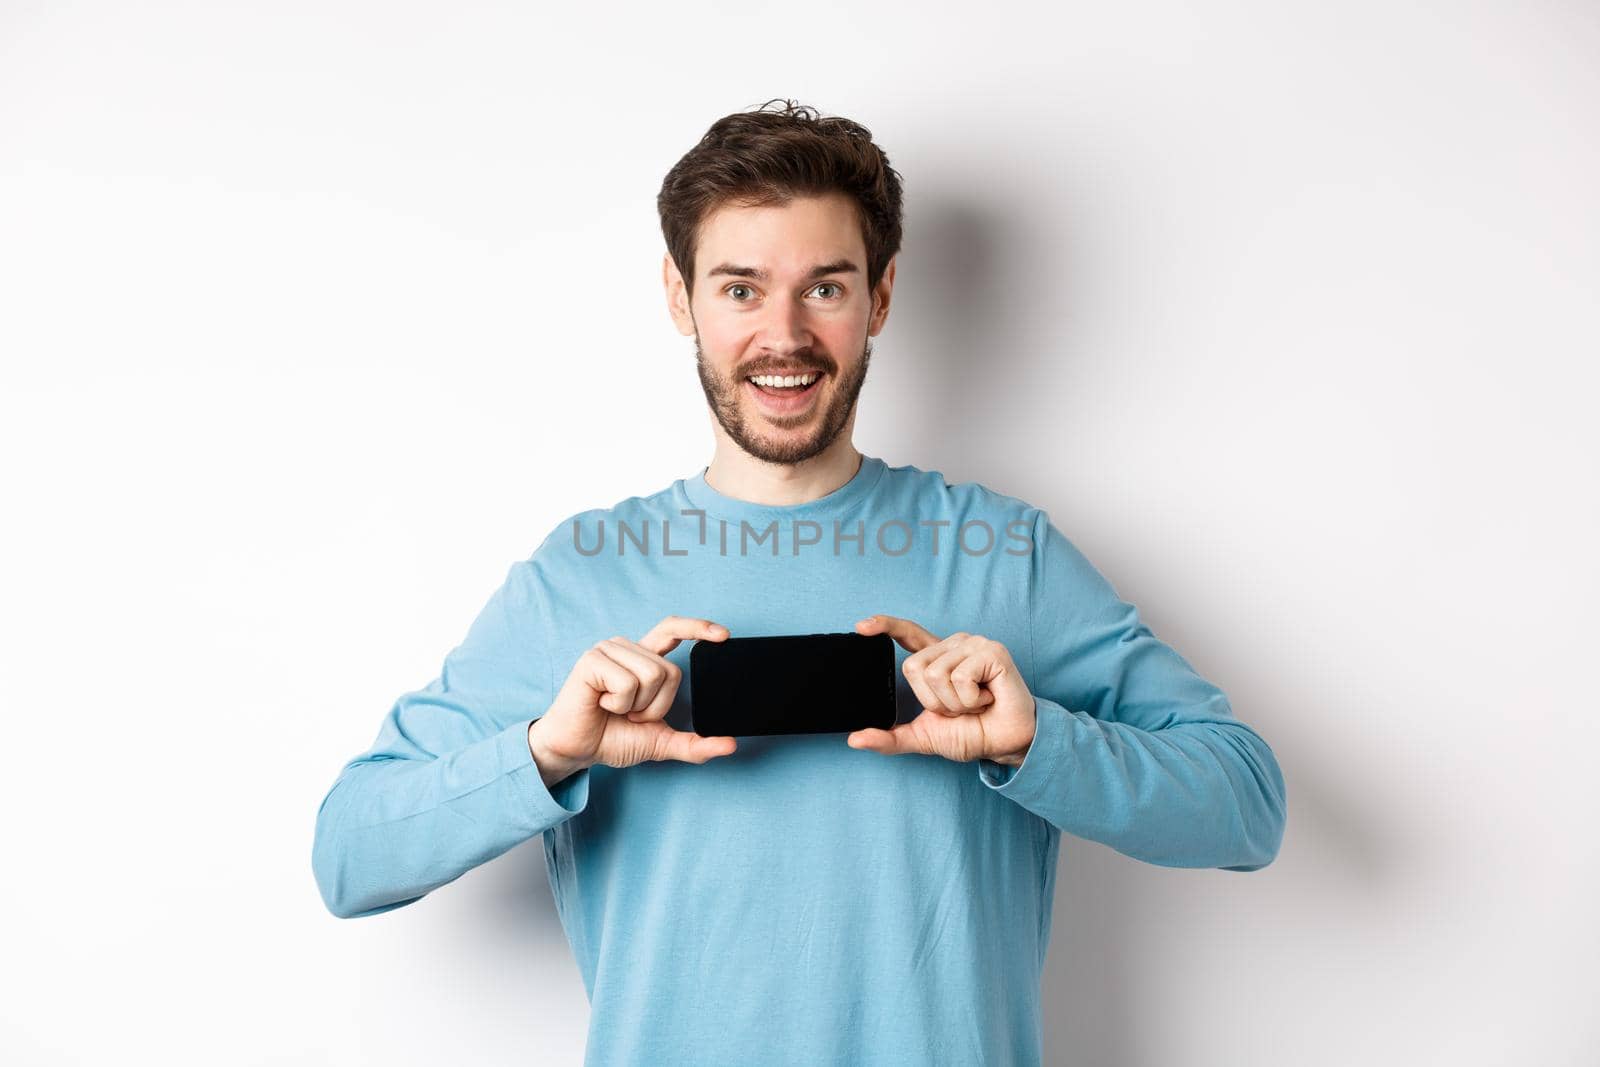 E-commerce and shopping concept. Smiling cheerful man showing empty smartphone screen in horizontal position, looking happy at camera, white background.